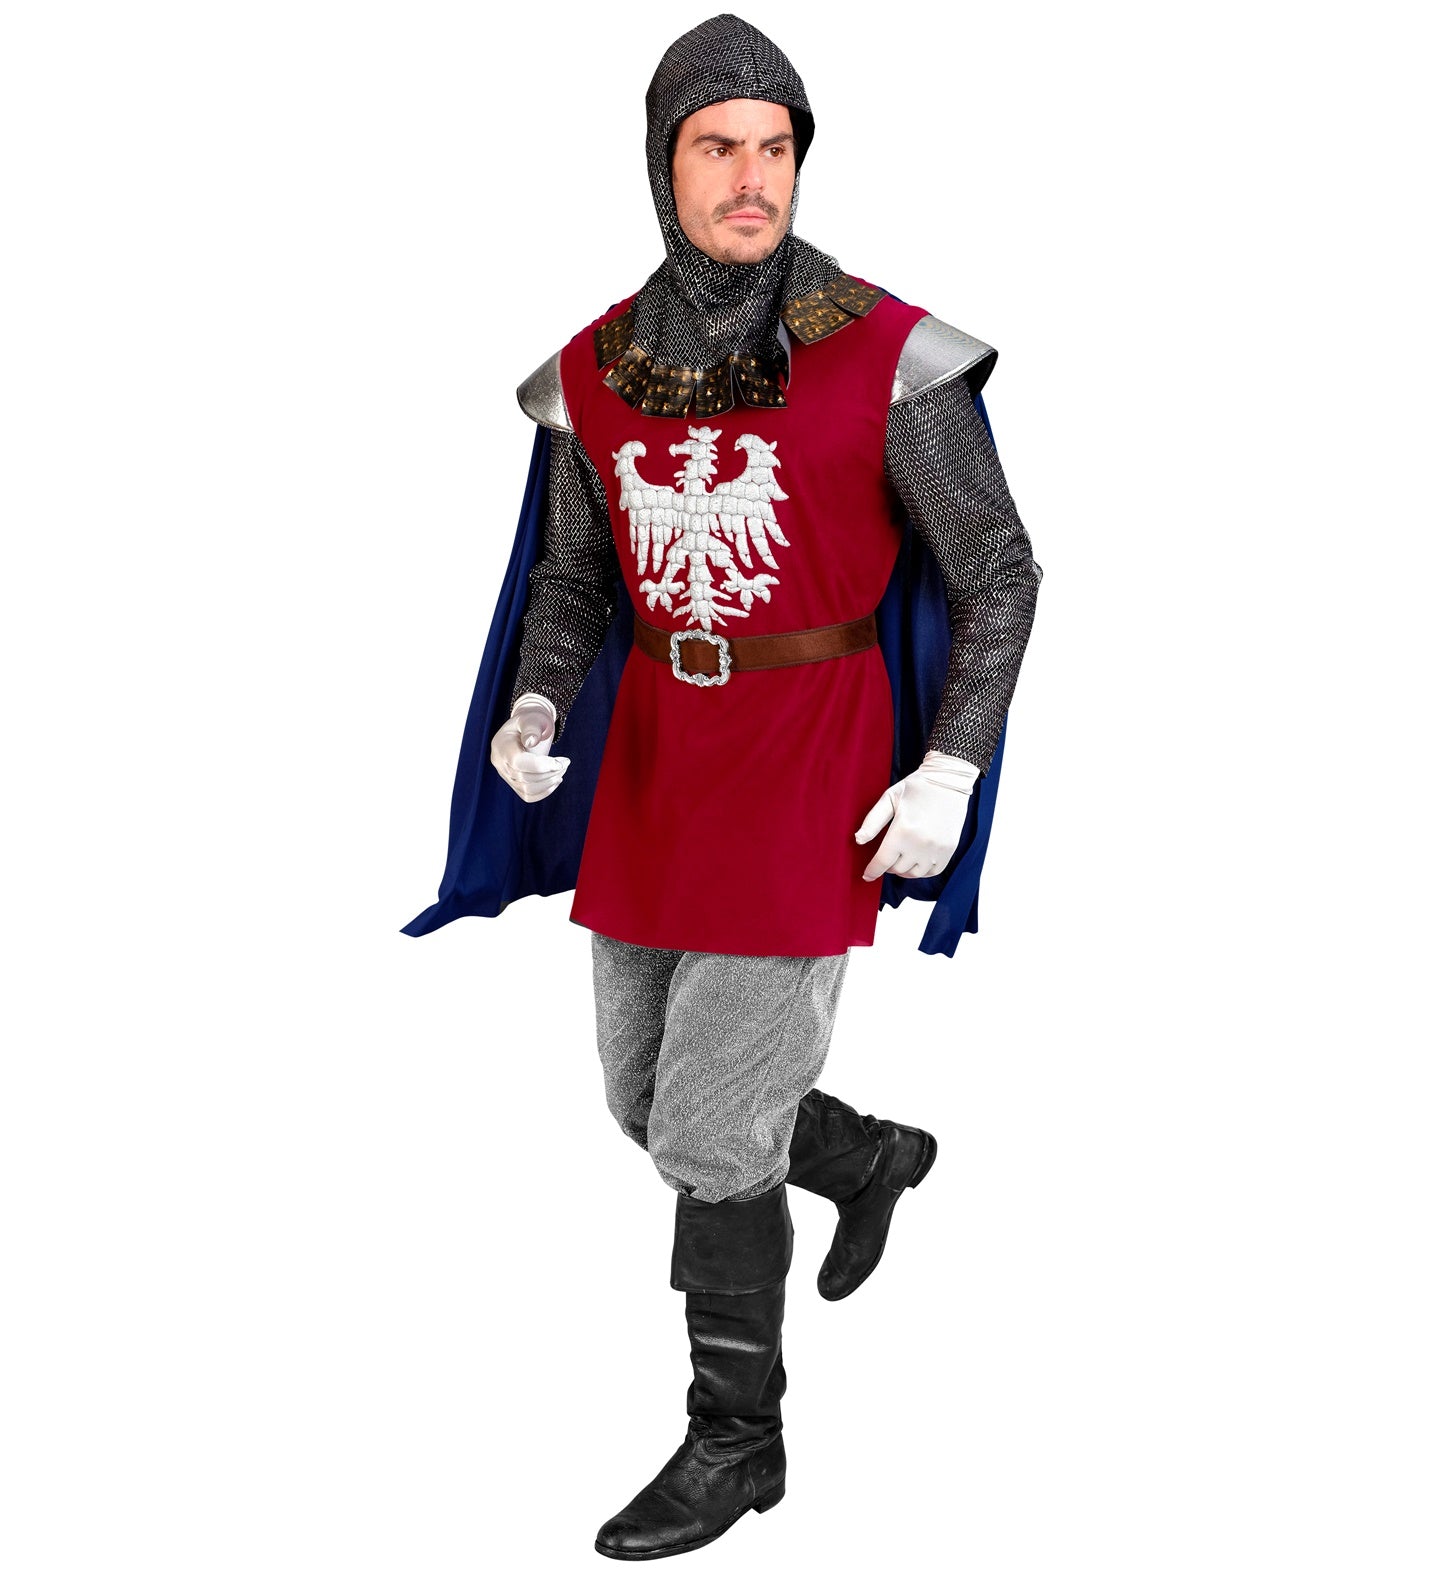 Valiant Knight fancy dress outfit for men